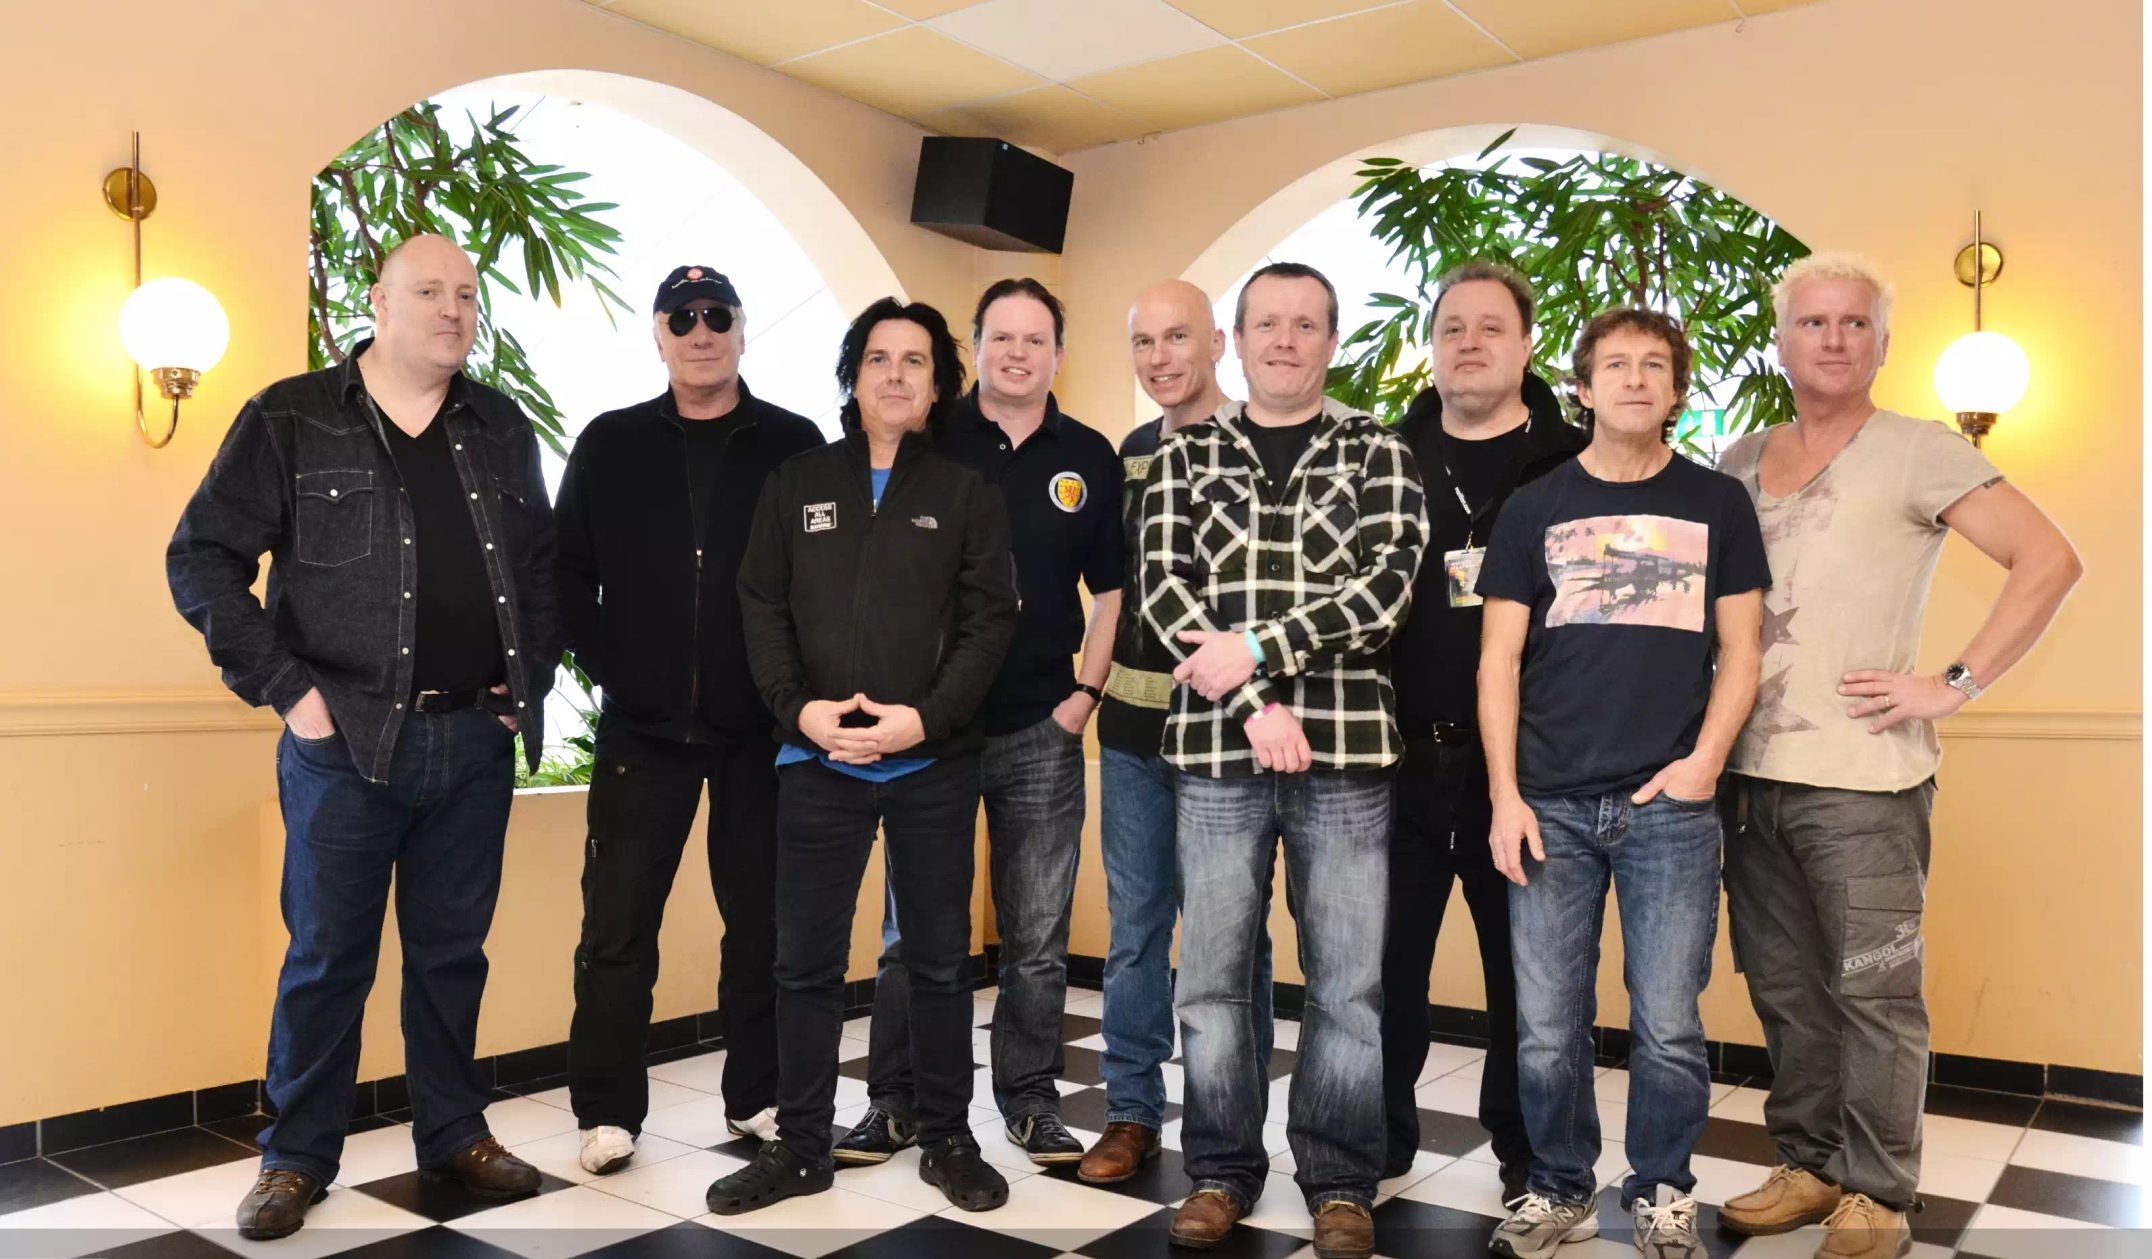 Kevin O'Neil, left, and friends met members of Marillion three years ago.